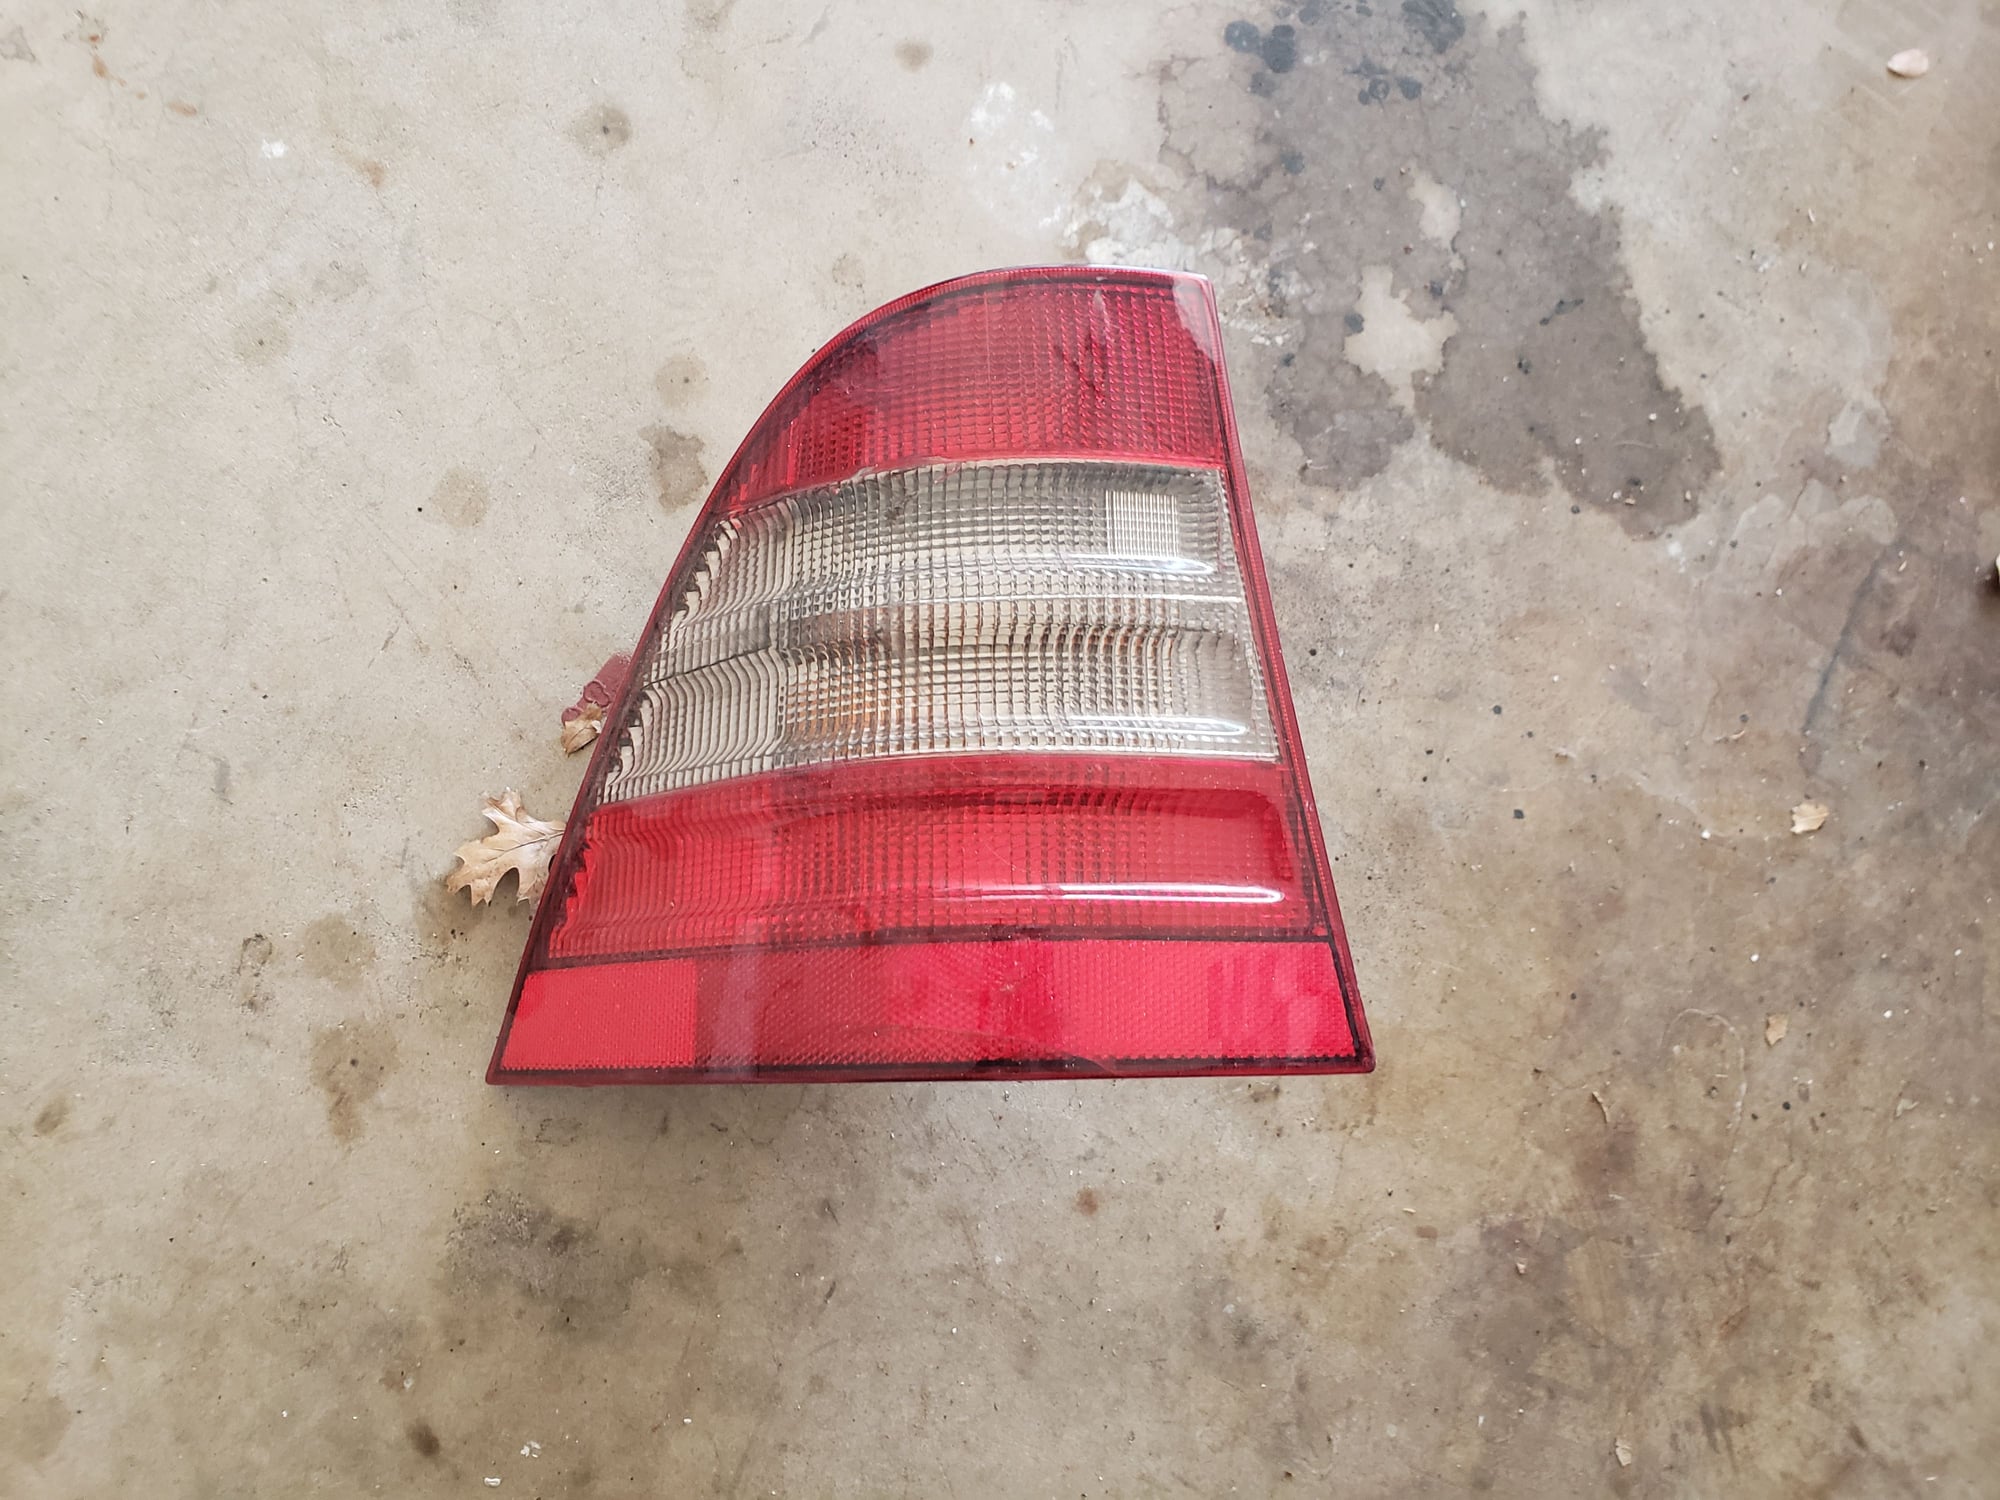 Lights - W163 ML passenger headlight and drivers tailight - Used - 1998 to 2002 Mercedes-Benz ML430 - Dallas, TX 75063, United States